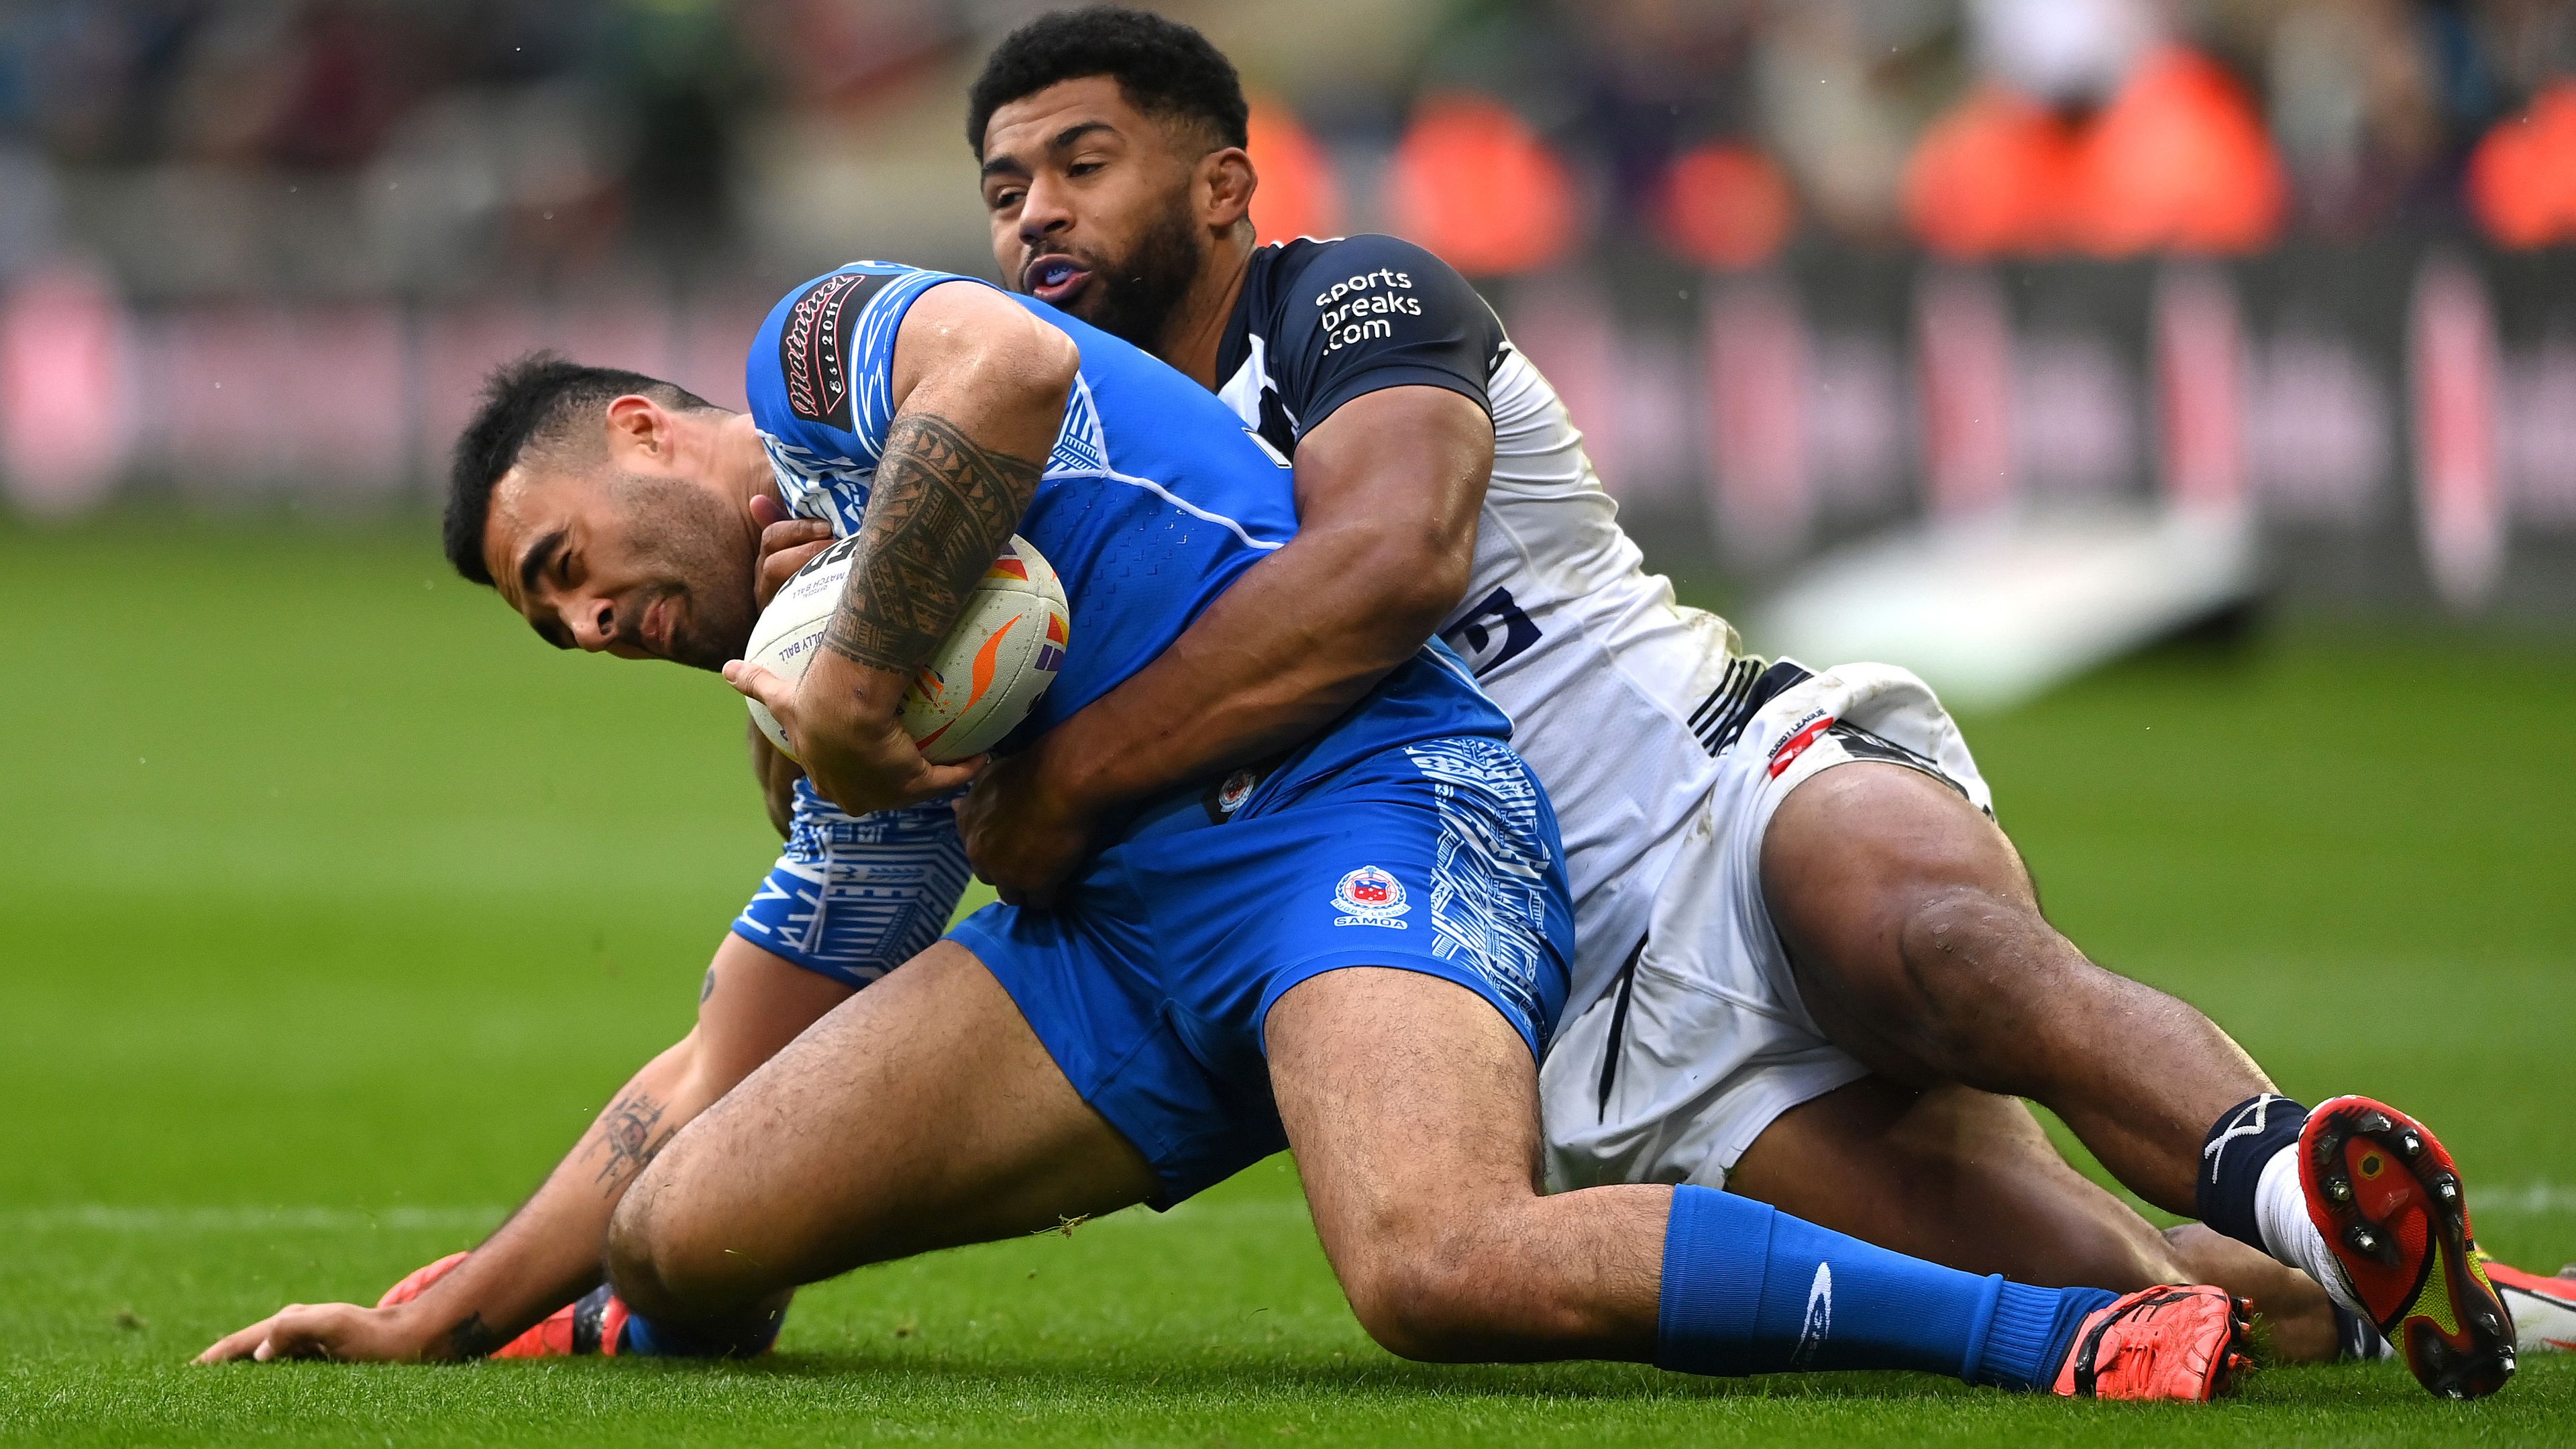 Samoa player Tyrone May is injured in a tackle by Kallum Watkins of England before being stretchered off during Rugby League World Cup 2021 Pool A match between England and Samoa at St. James Park on October 15, 2022 in Newcastle upon Tyne, England. (Photo by Stu Forster/Getty Images)